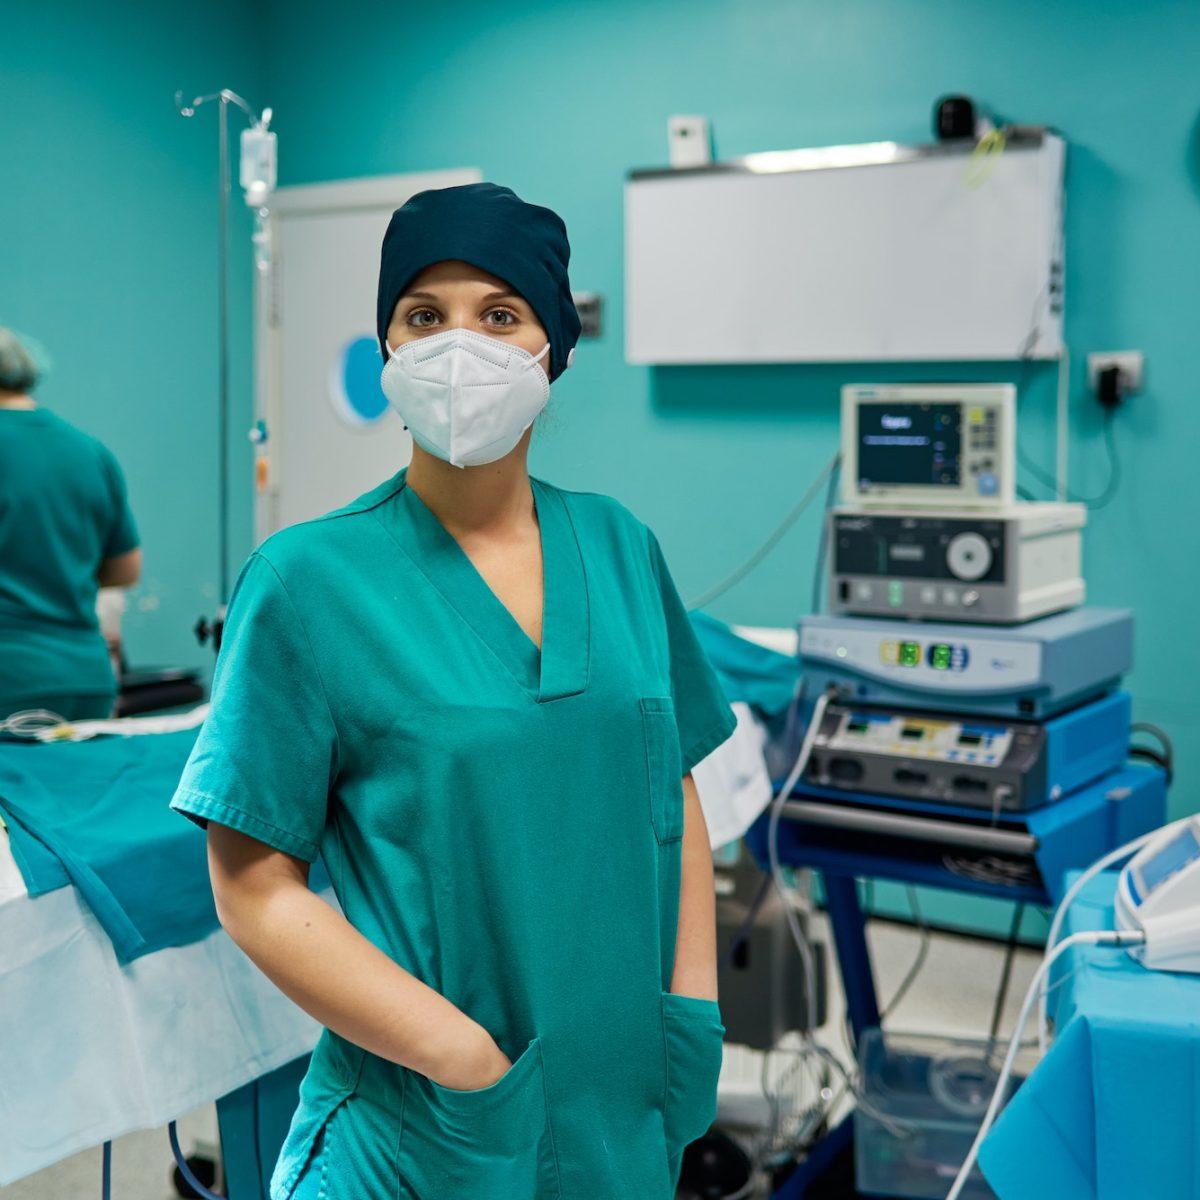 Surgeon in uniform and respiratory mask in clinic